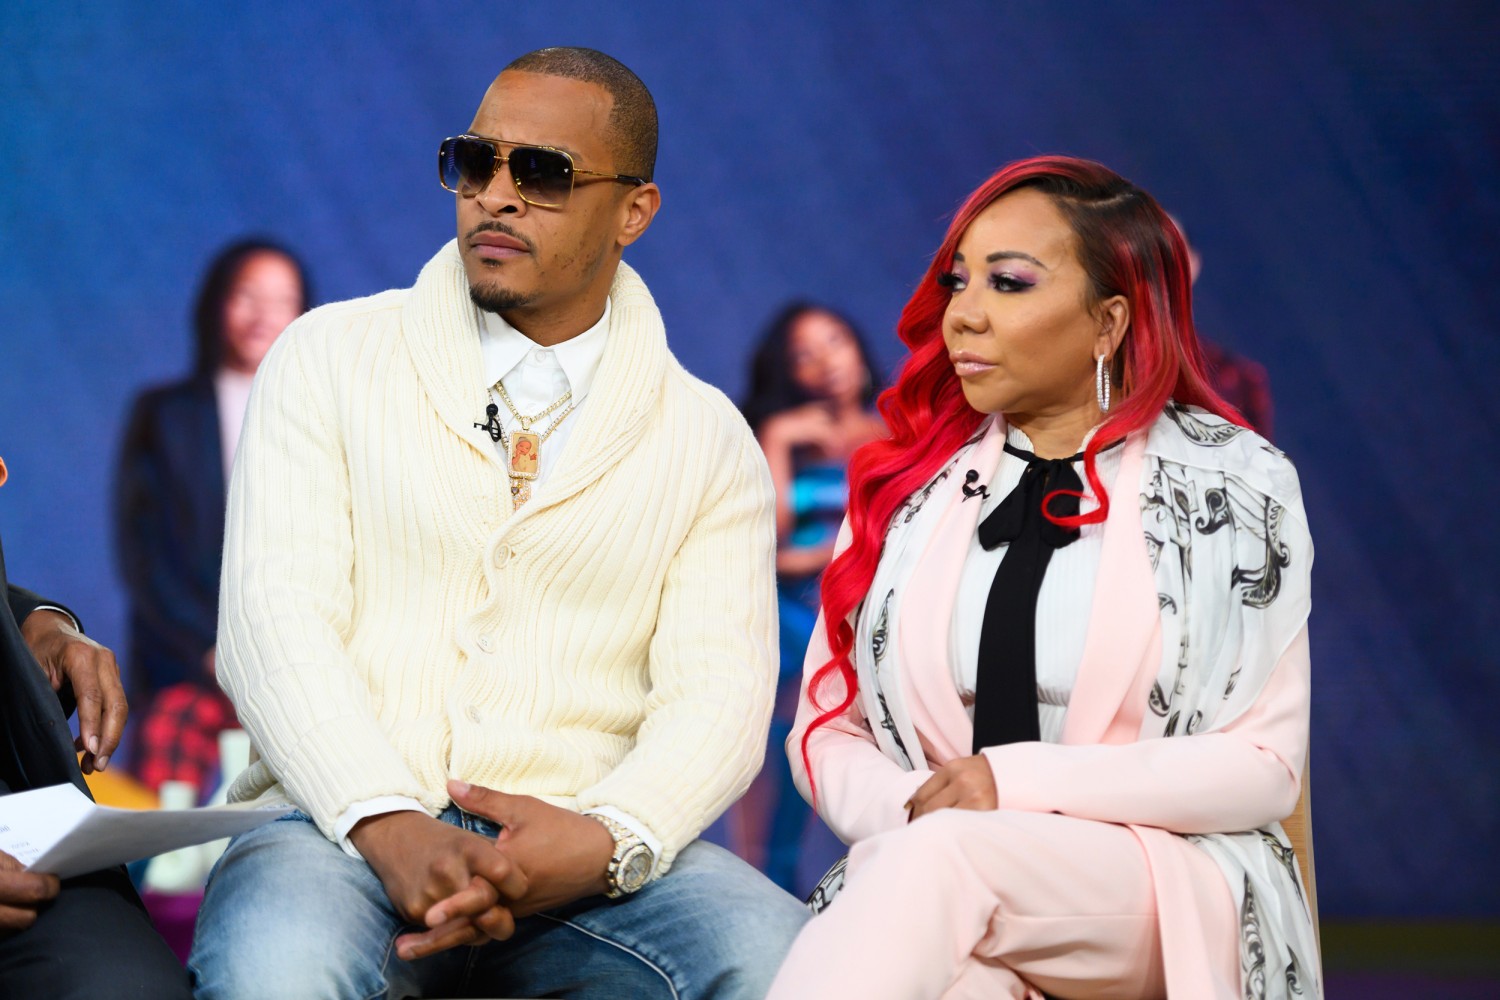 Rapper T.I., Wife Tiny face sexual assault allegations from two women photo